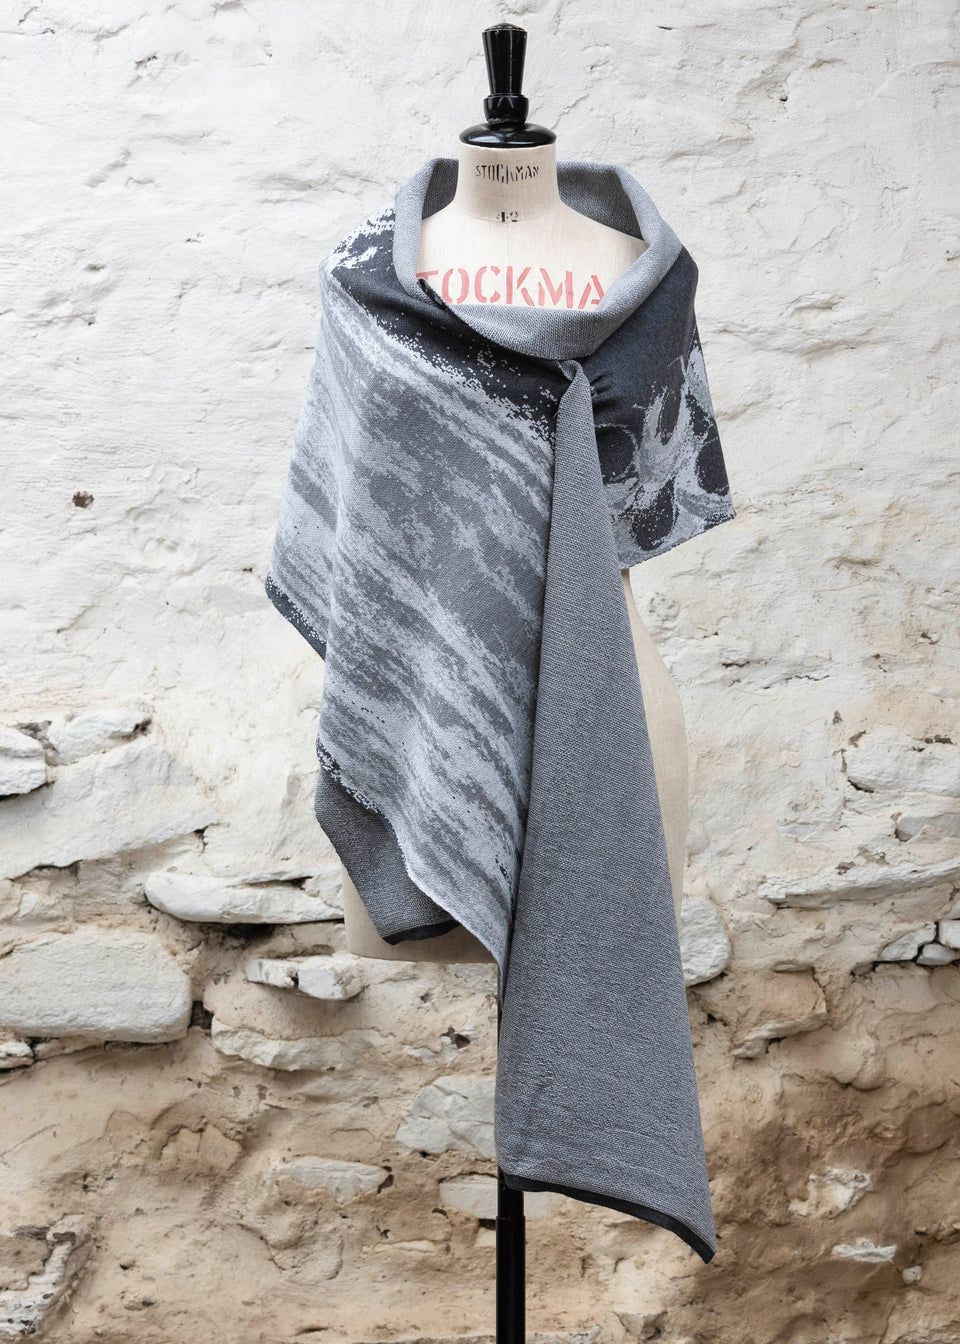 Finely knitted shawl in luxurious merino, made in Scotland. Shown on a vintage mannequin against a whitewashed wall. Abstract design in sea greys with curvilinear motifs. Draped to show whole shawl from the front, with a pin